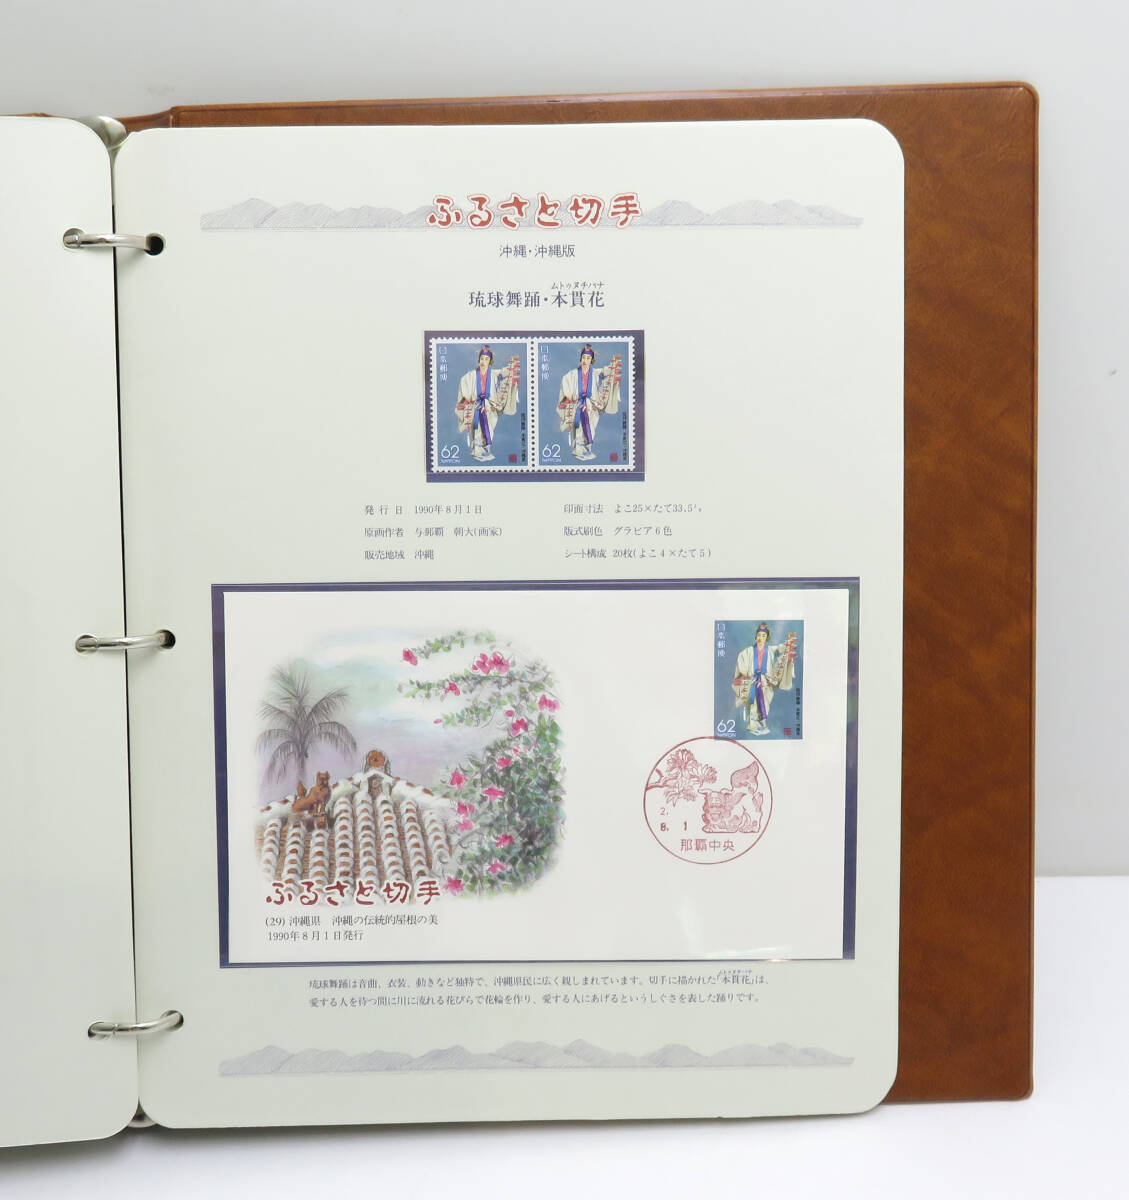 * storage goods * Furusato Stamp collection all 36 page 62 jpy stamp face value 4340 jpy 1989 year ~ First Day Cover commemorative stamp album .. service company 